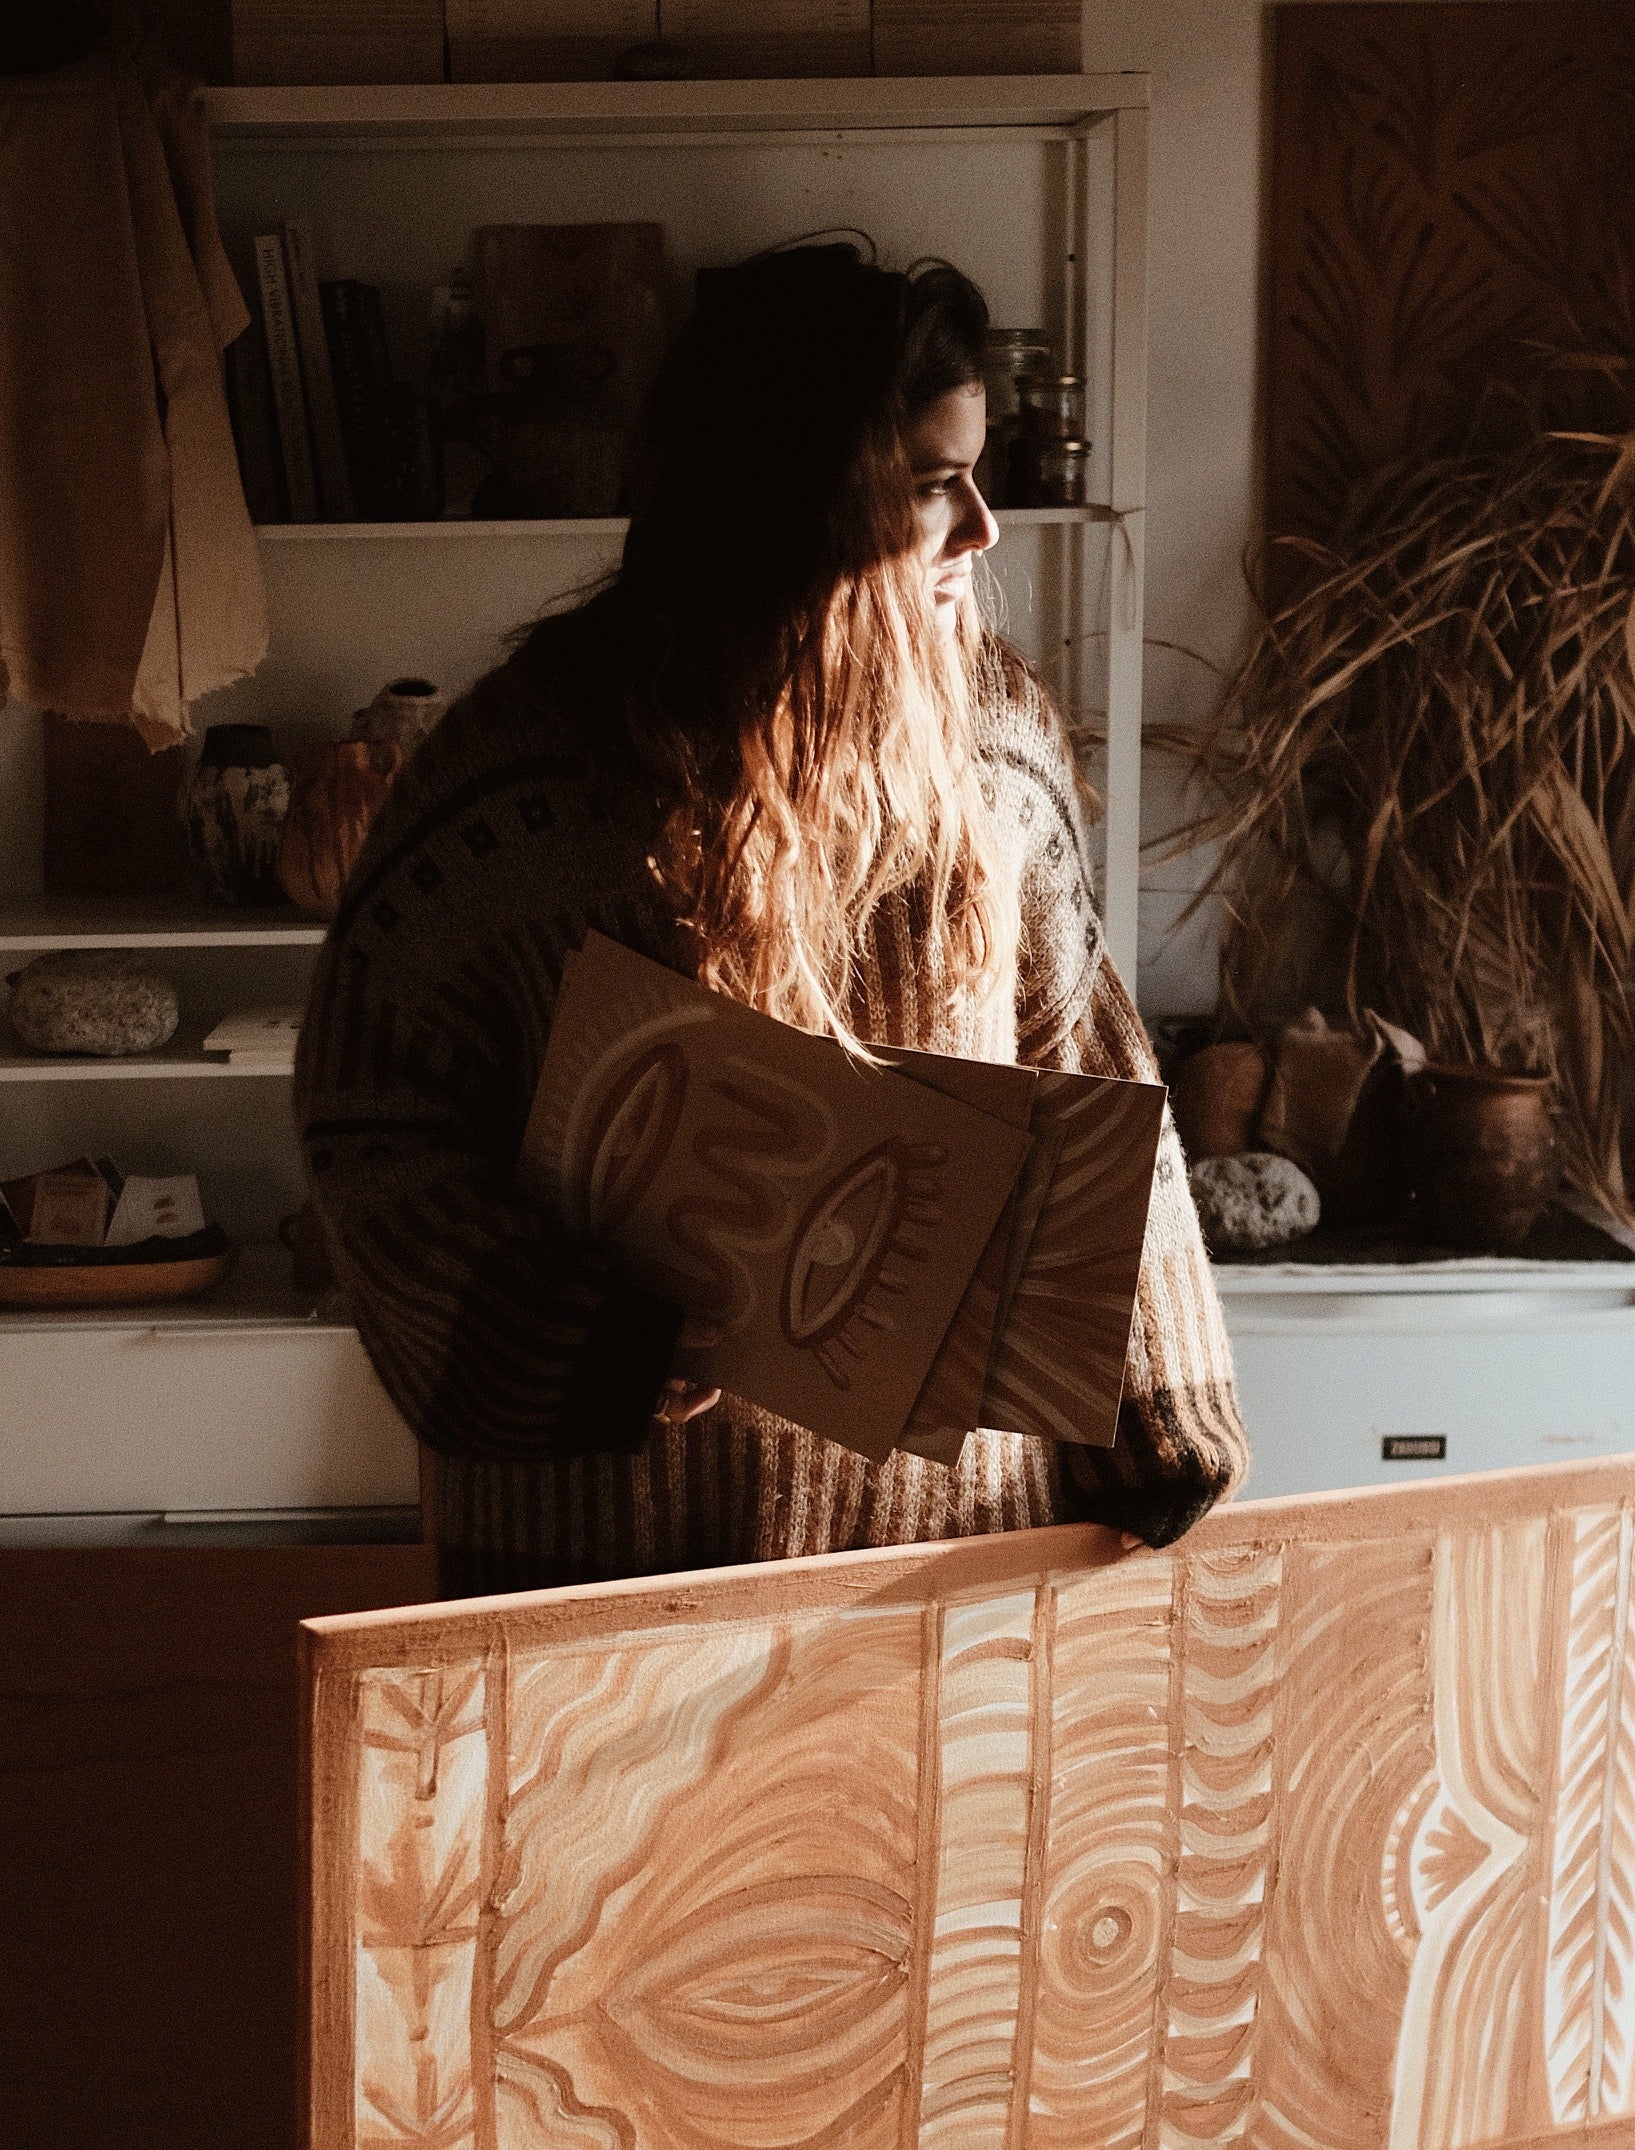 Meet Linda: an artist co-creating with nature